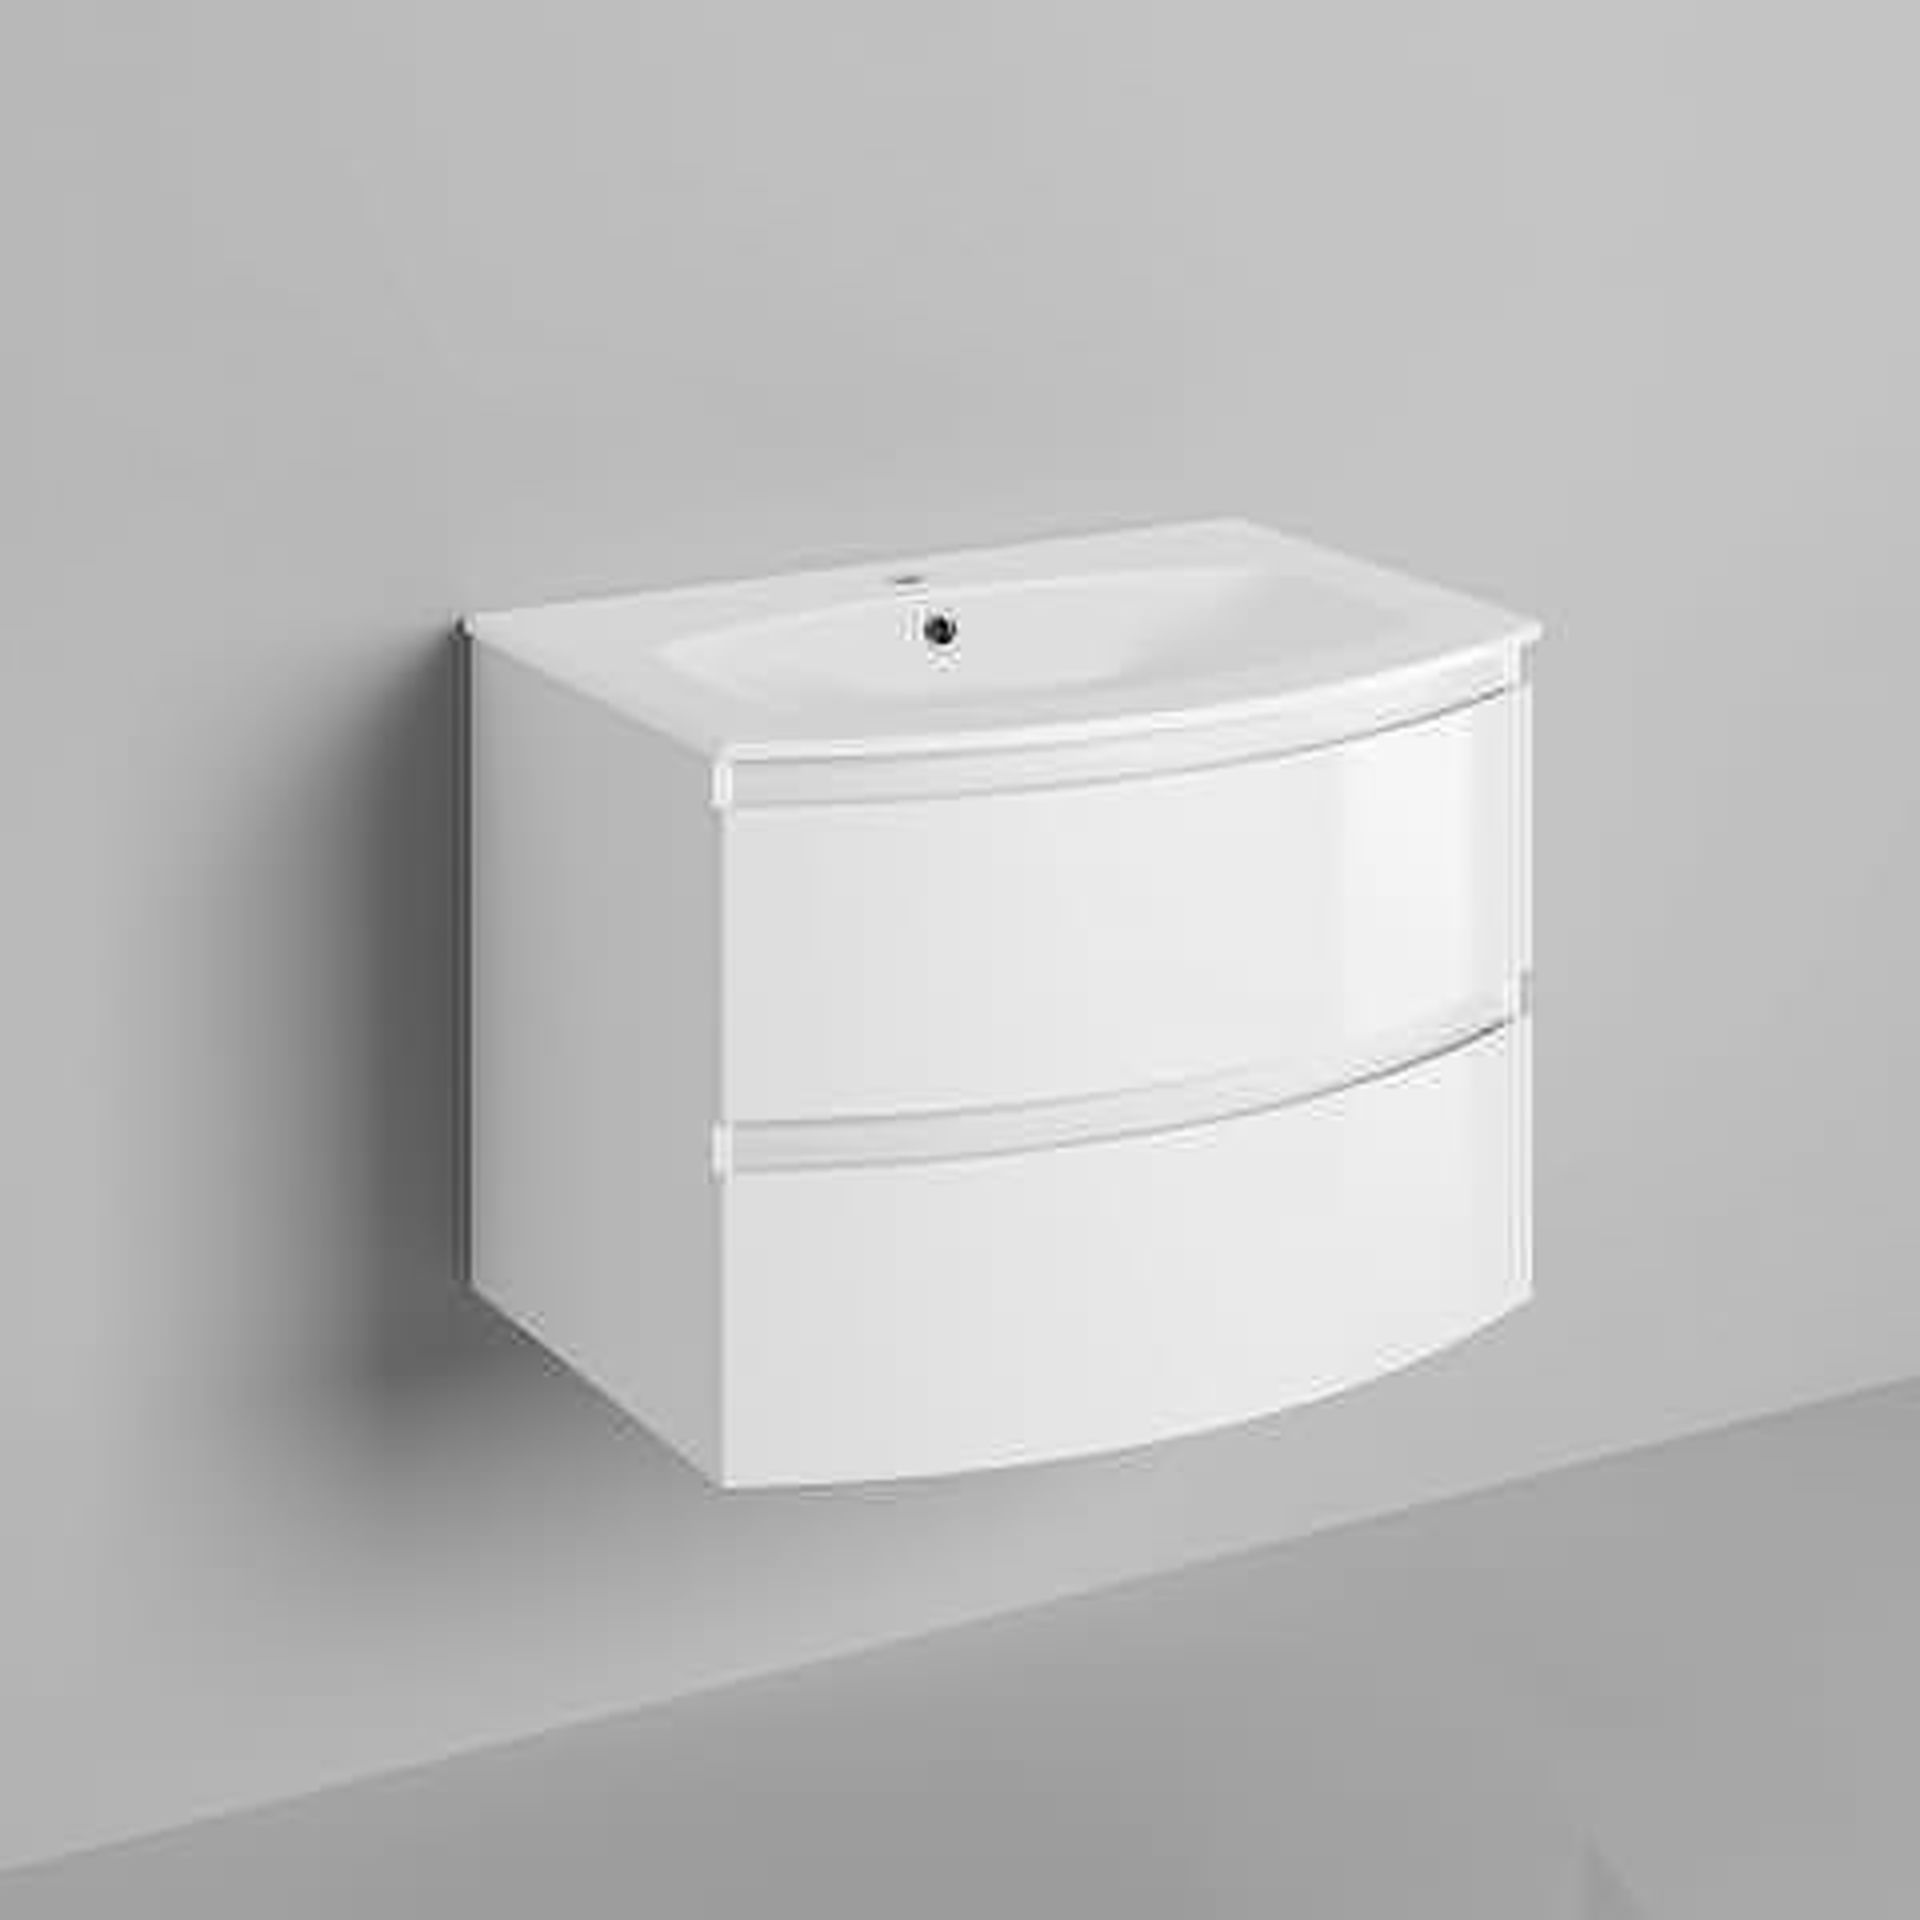 Pallet To Contain 5 x 700mm Amelie High Gloss White Curved Vanity Unit - Wall Hung. RRP £649.99 - Image 5 of 5